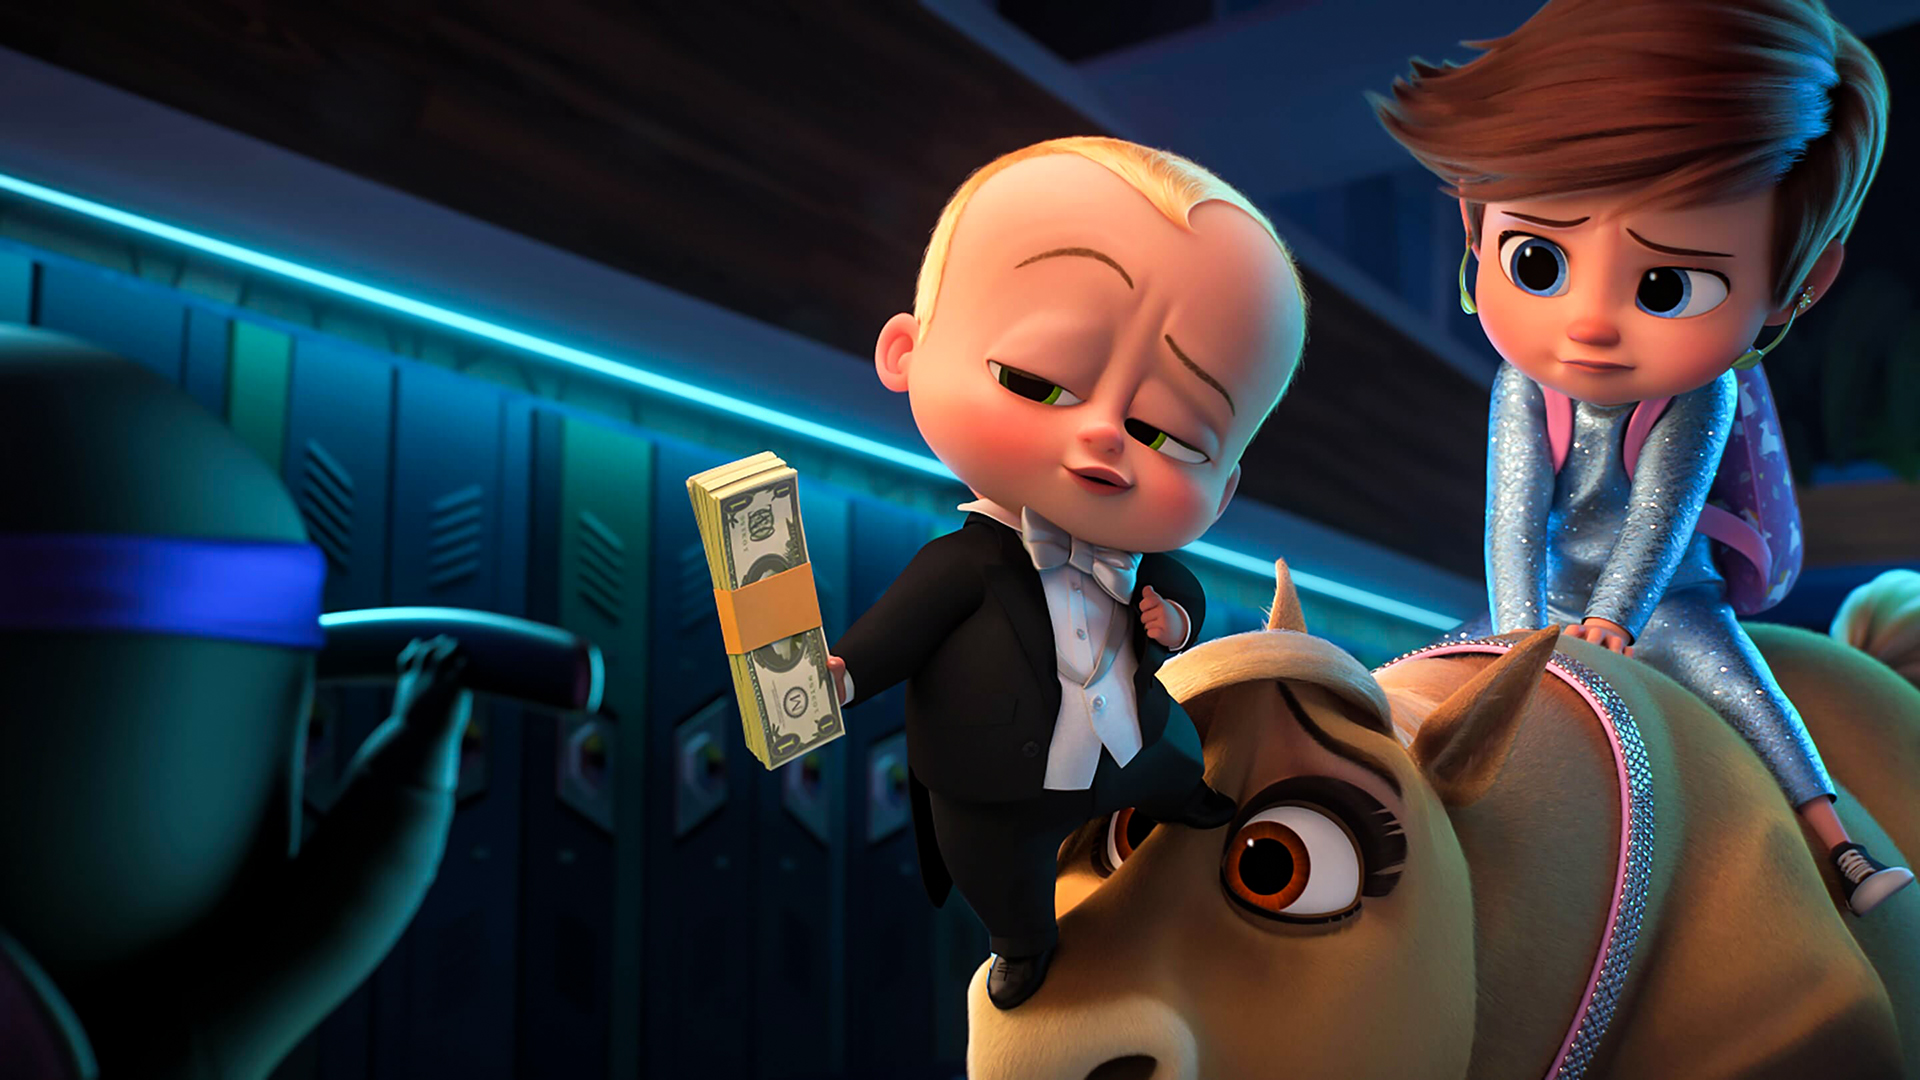 THE BOSS BABY: FAMILY BUSINESS